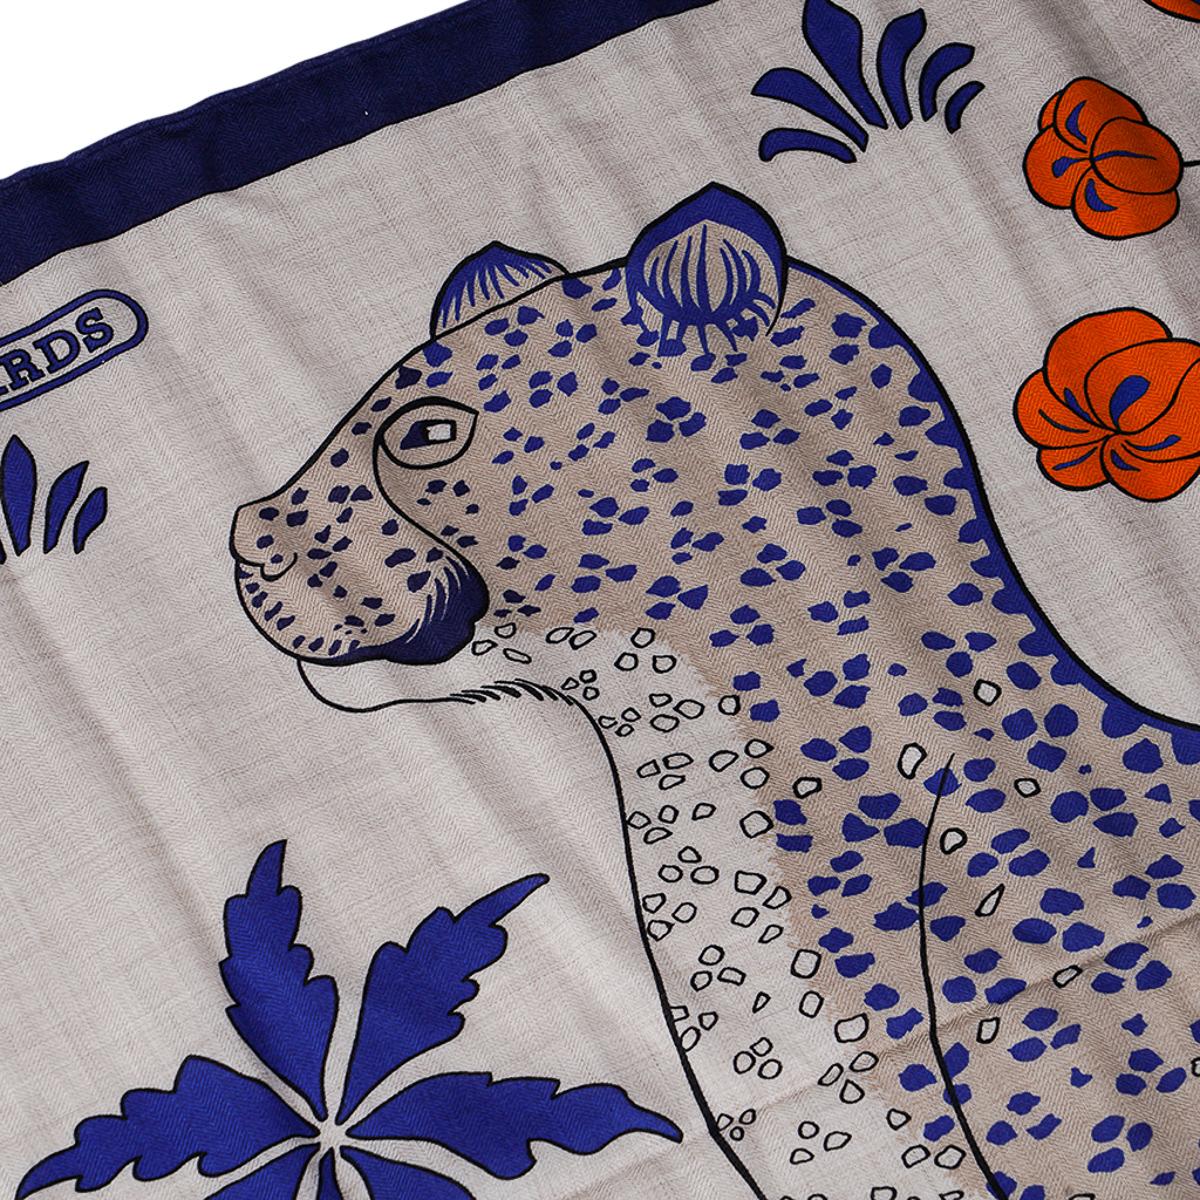 Mightychic offers an  Hermes Les Leopards Cashmere and Silk shawl.
Featured in Naturel, Blue and Orange colorway.
Designed by Christiane Vauzelles.
This beautiful Hermes shawl is perfect for year round wear.
Signature hand rolled edge.
NEW or NEVER